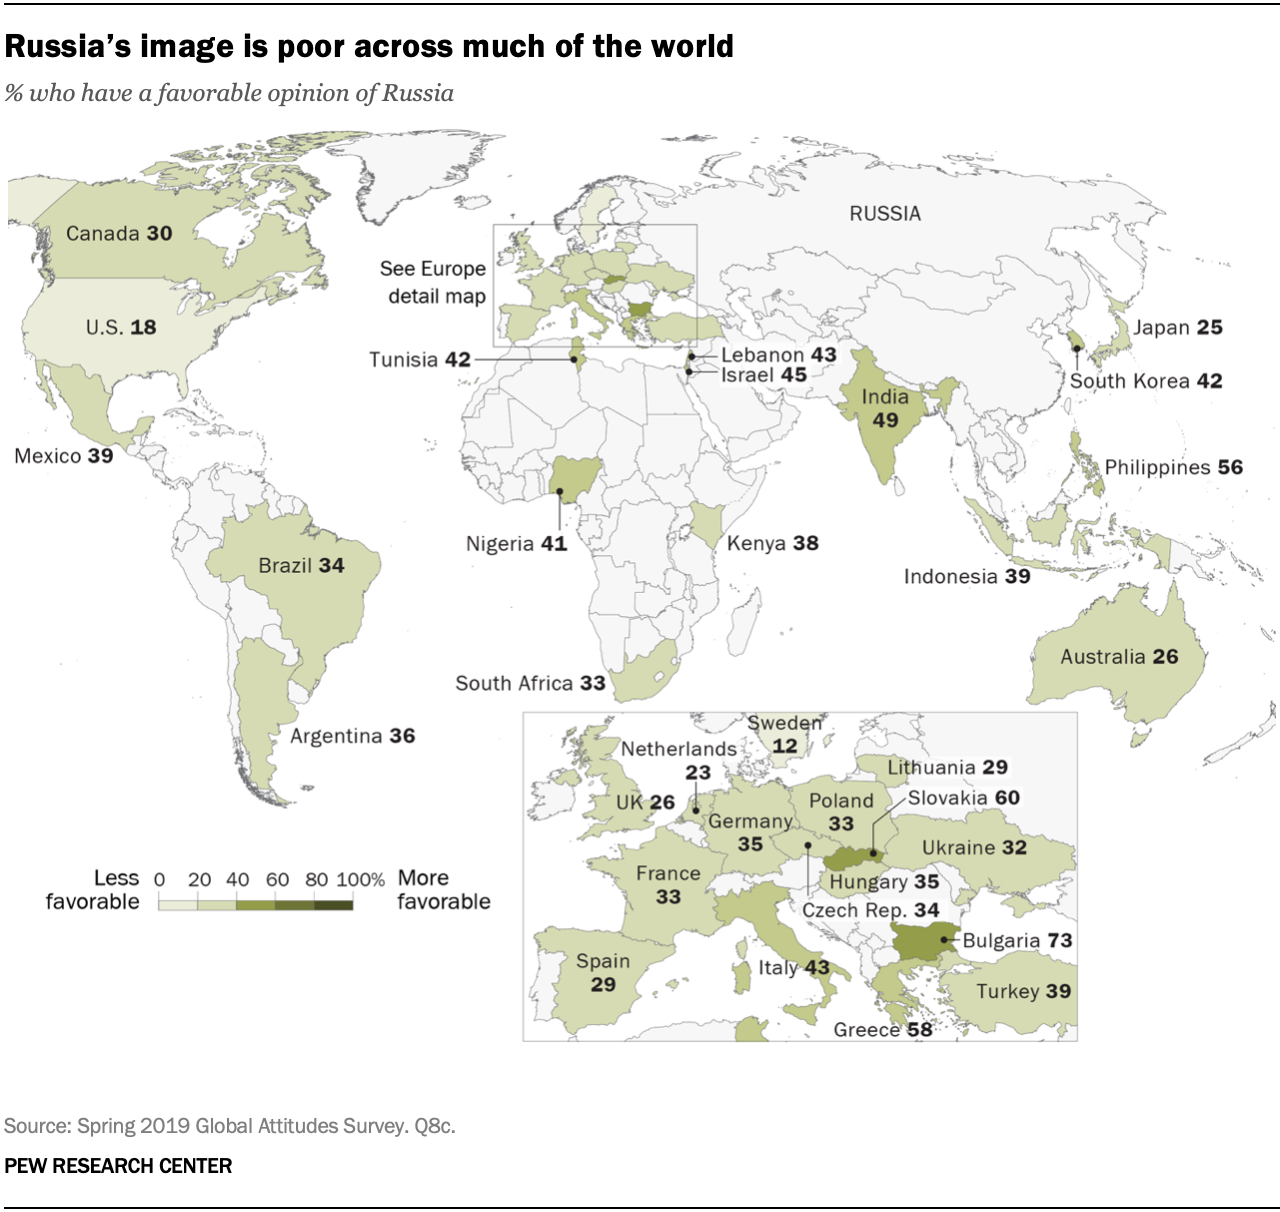 Russia’s image is poor across much of the world